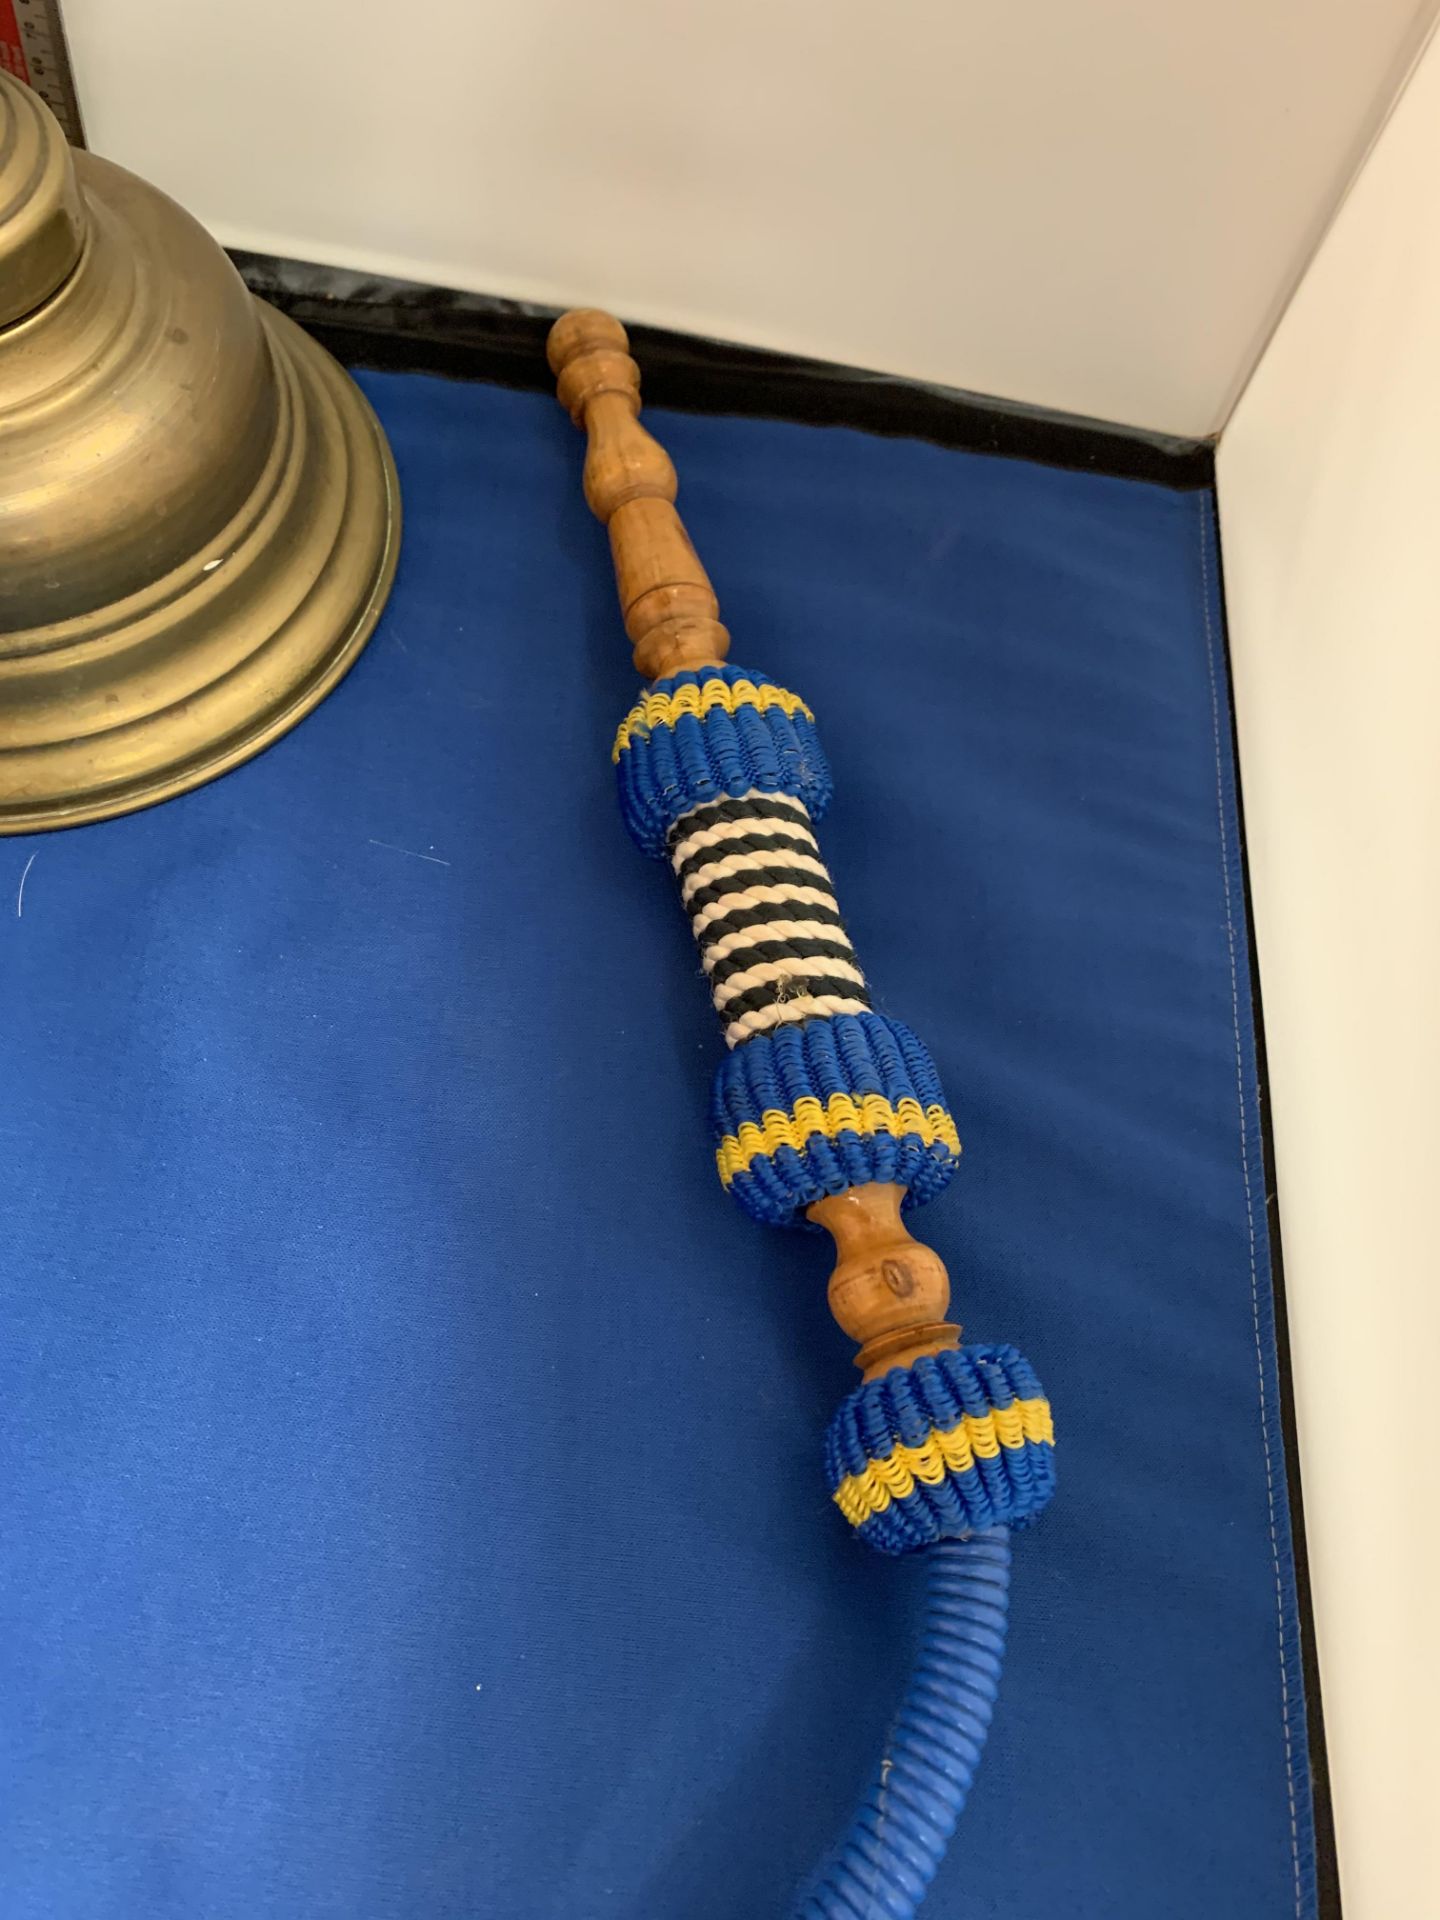 A BRASS SHISHA PIPE WITH A BLUE BRAIDED PIPE - Image 4 of 5